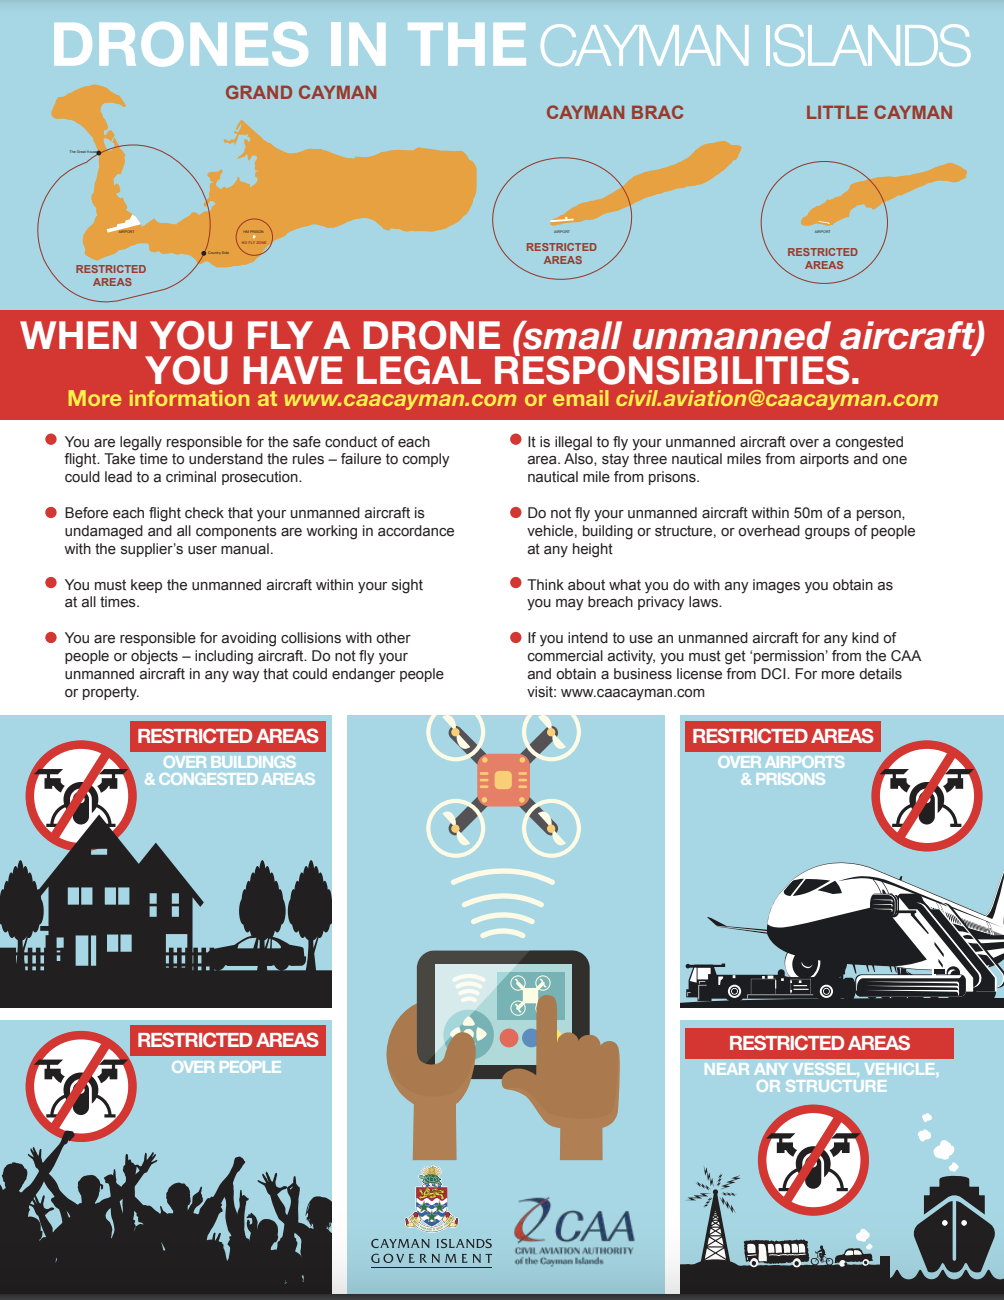 Drones in the Cayman Islands